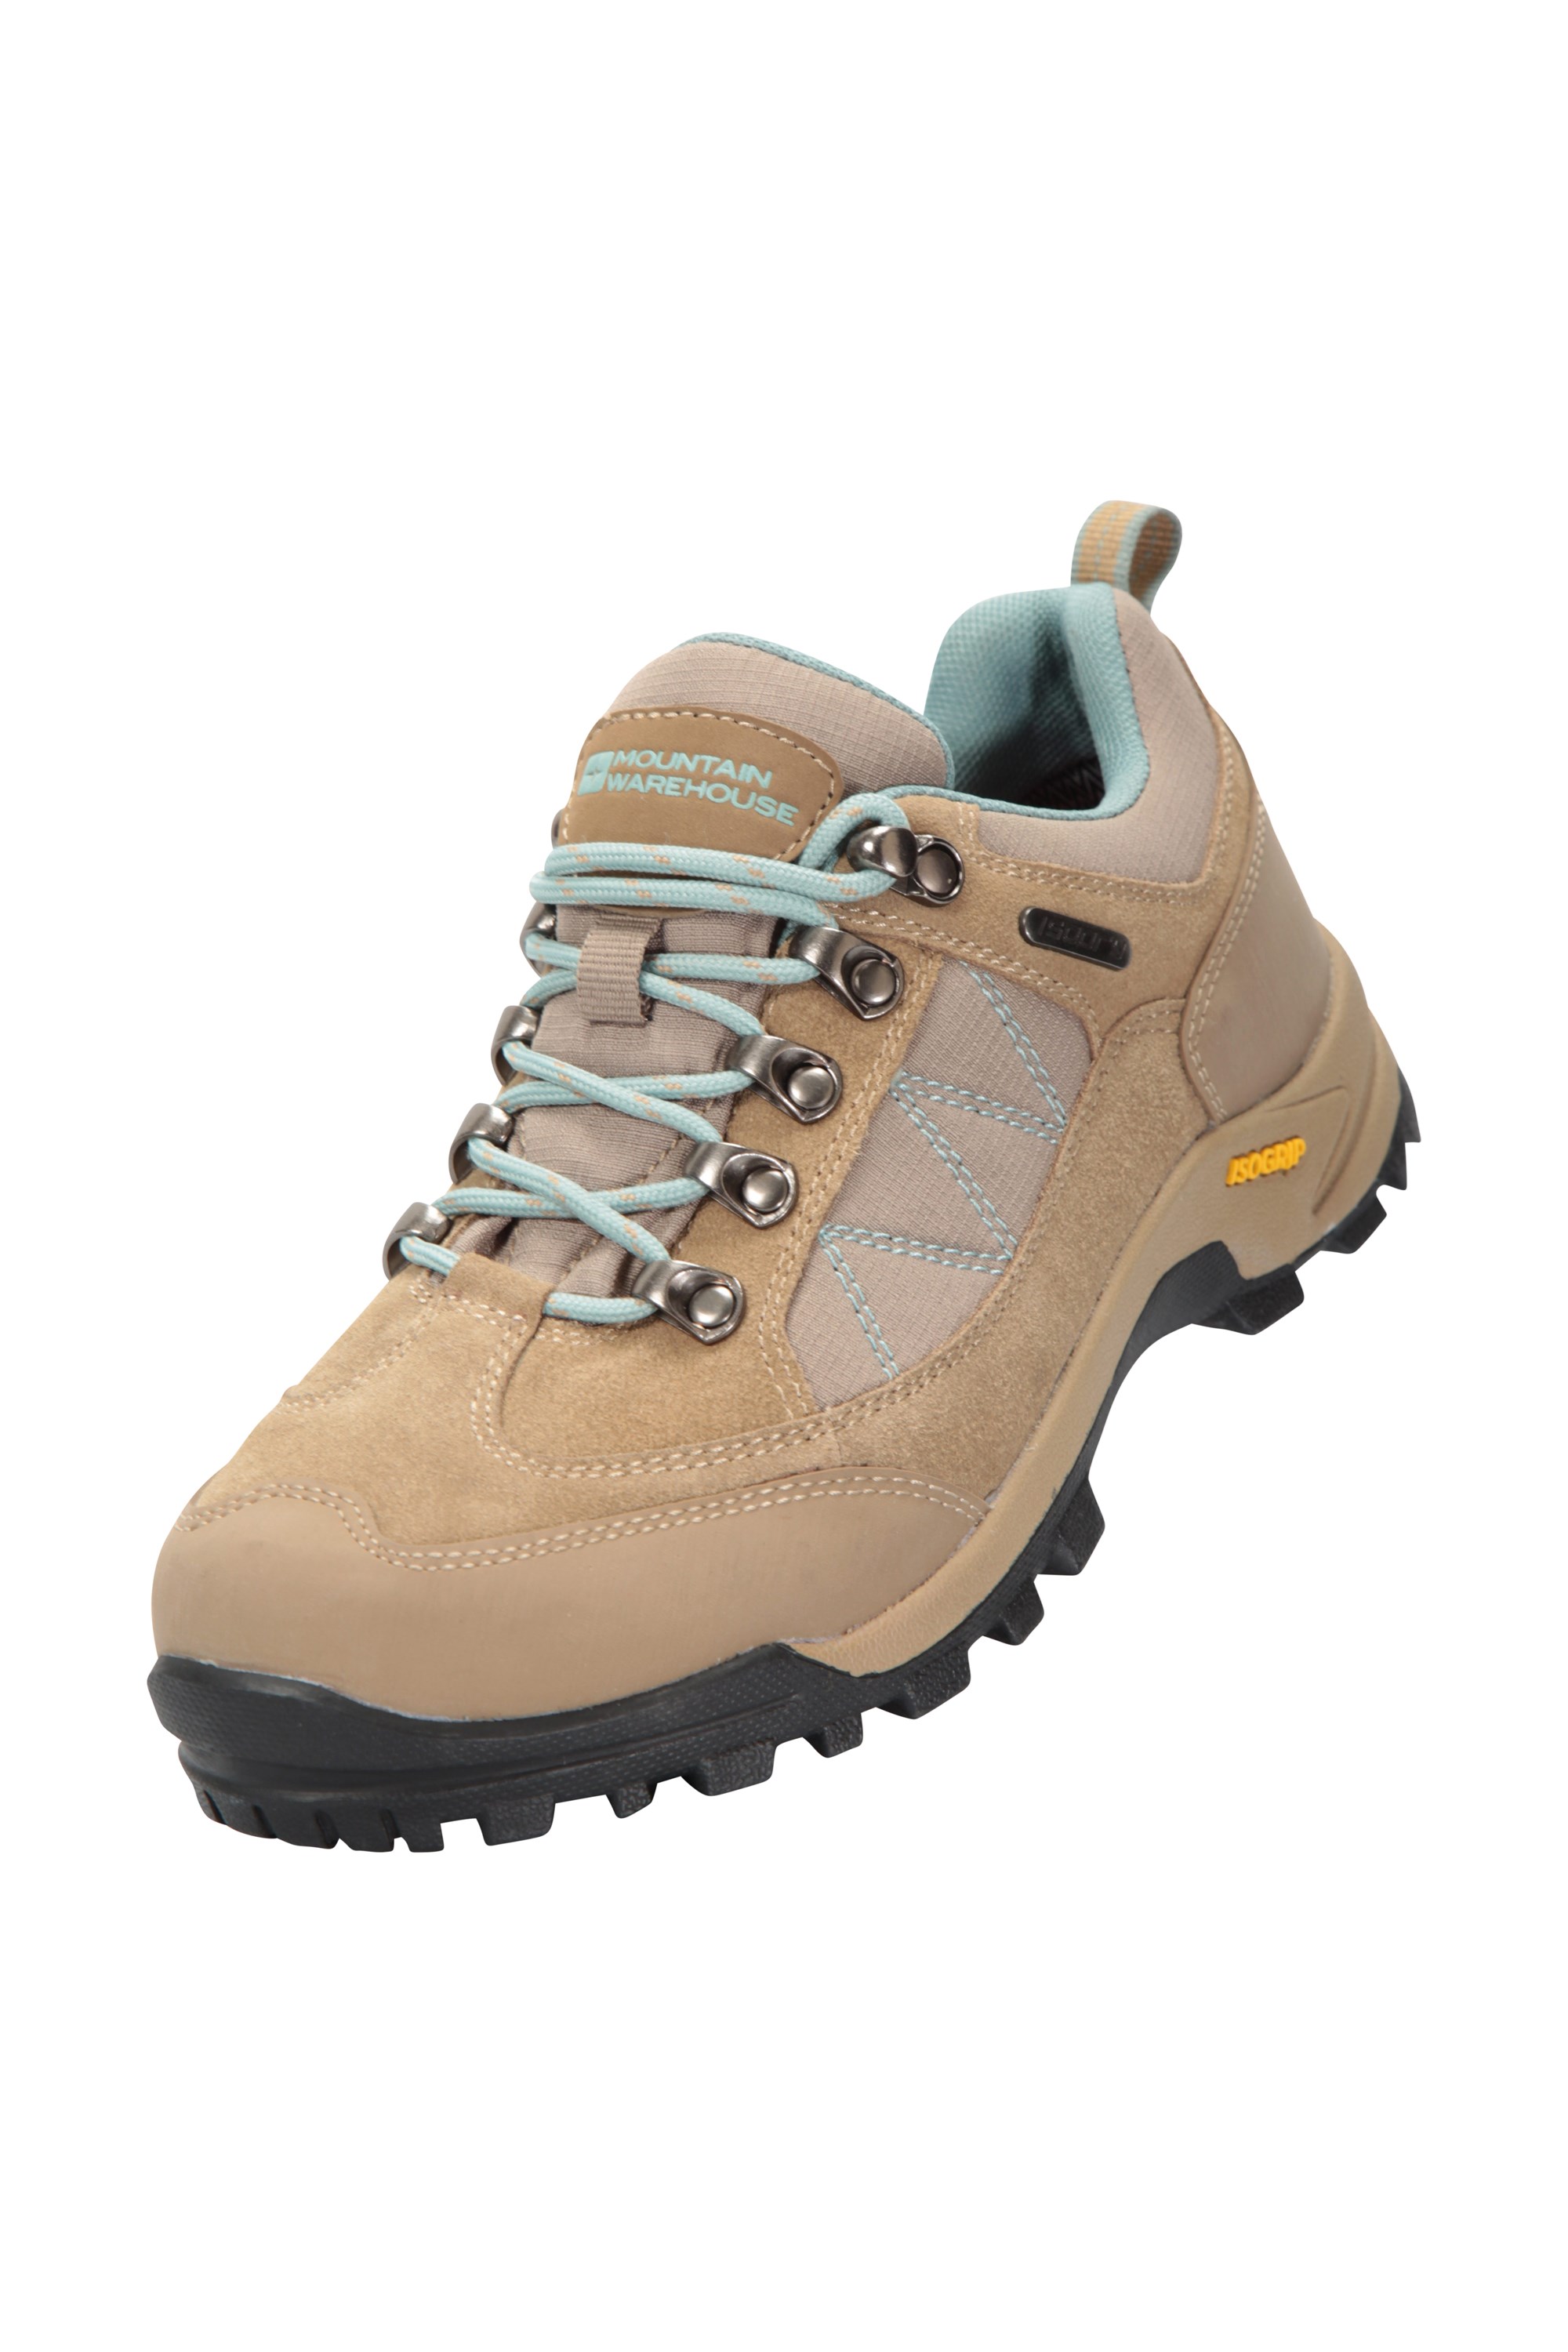 mountain warehouse isodry shoes